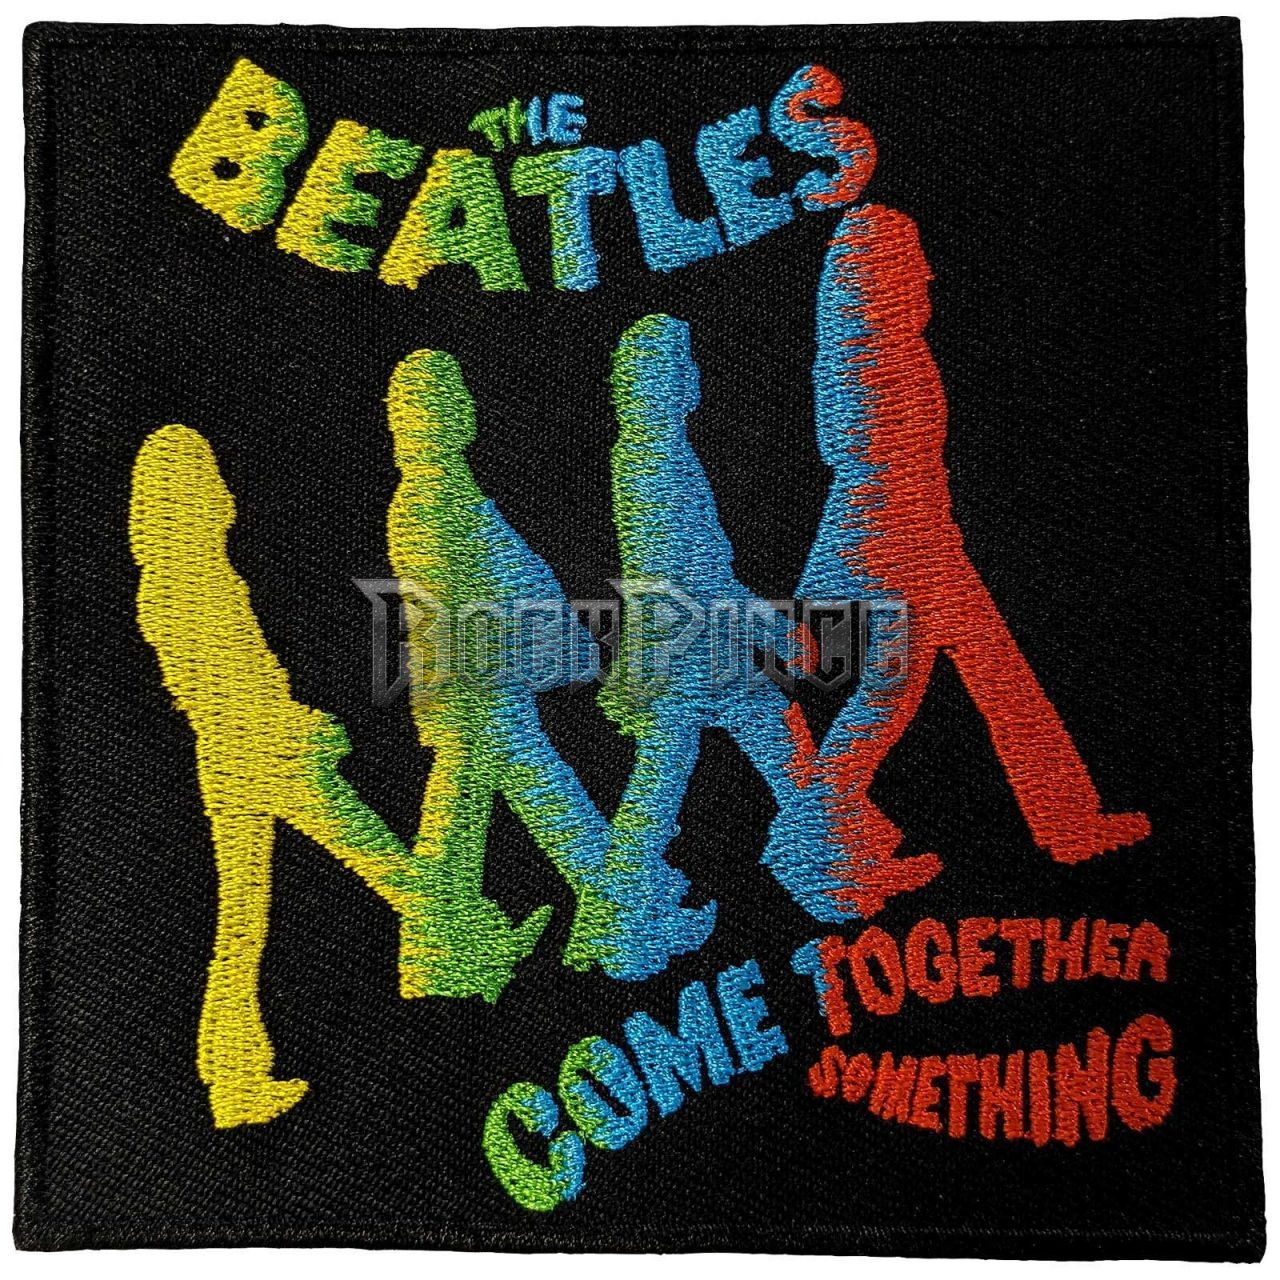 The Beatles - Come Together/Something - kisfelvarró - BEATPAT06